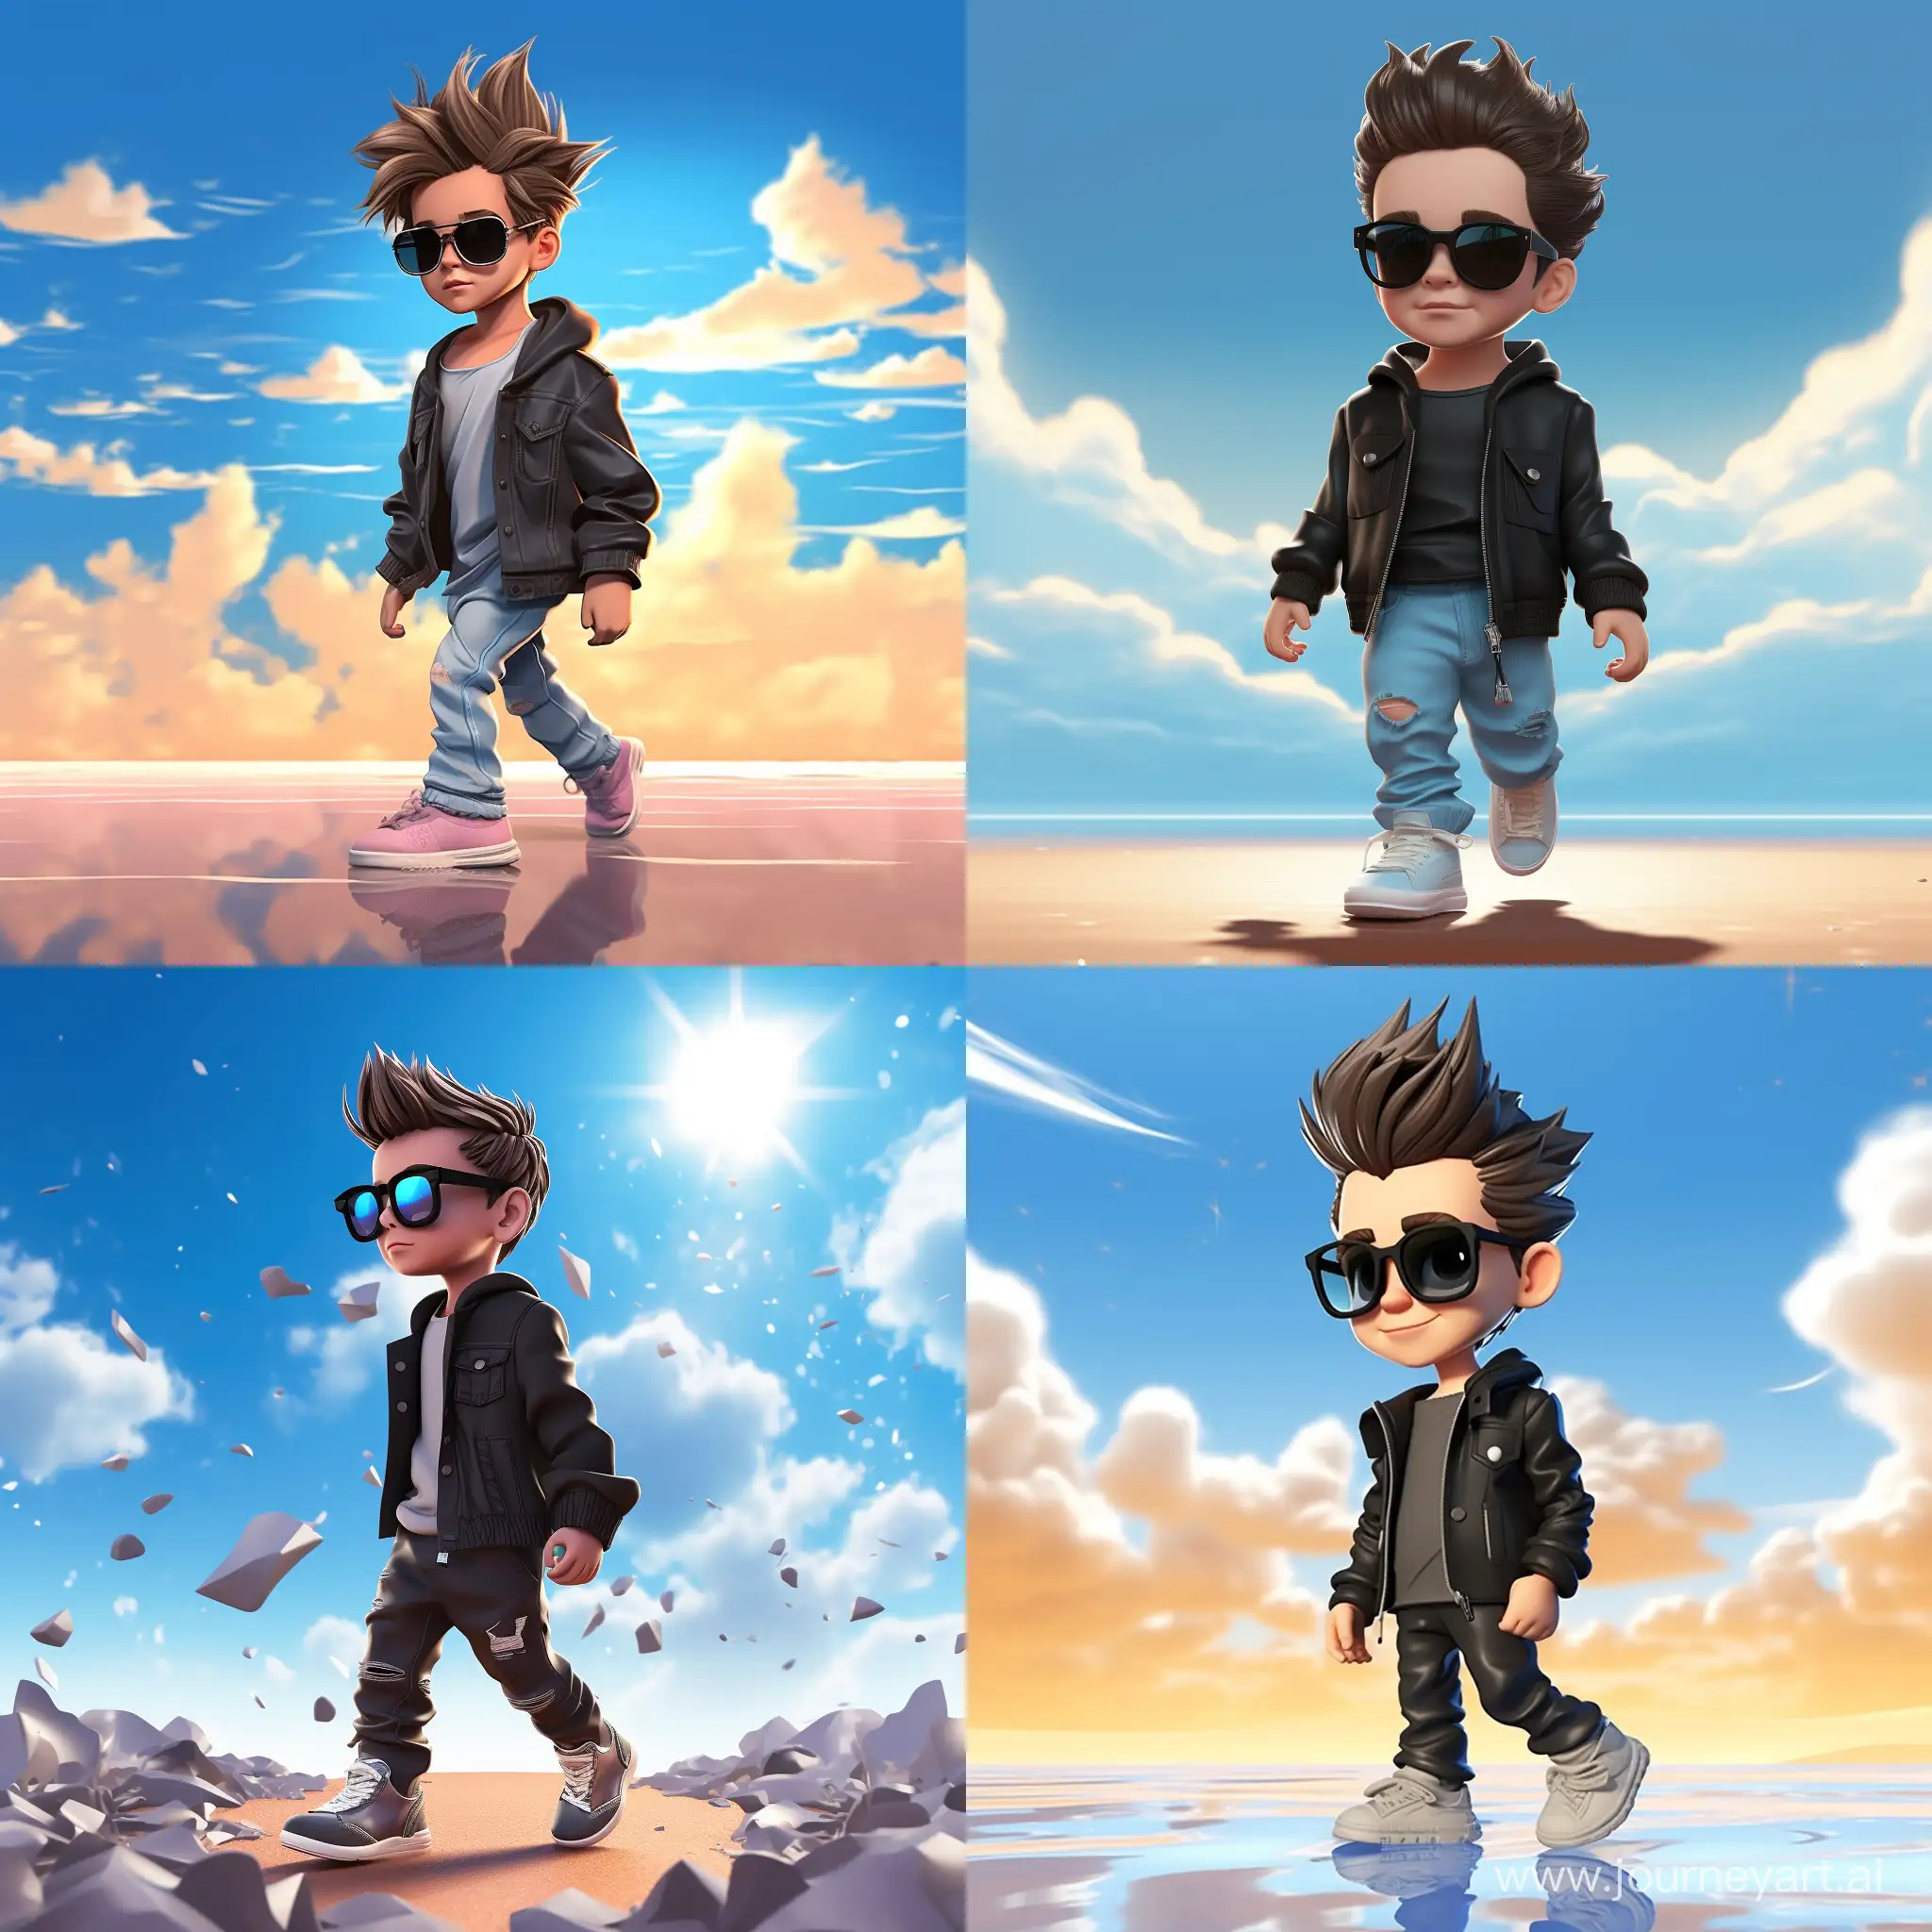 Create a 3D illustration of realistic human young child character walk out from social media Facebook. The character must wear blue jeans, black t-shirt name "Your Name" with long black coat and black sneakers, sunglasses, splash colorful water effect. The background is social media profile page with a user name "Your name" And profile picture of him and beautiful sky profile cover.